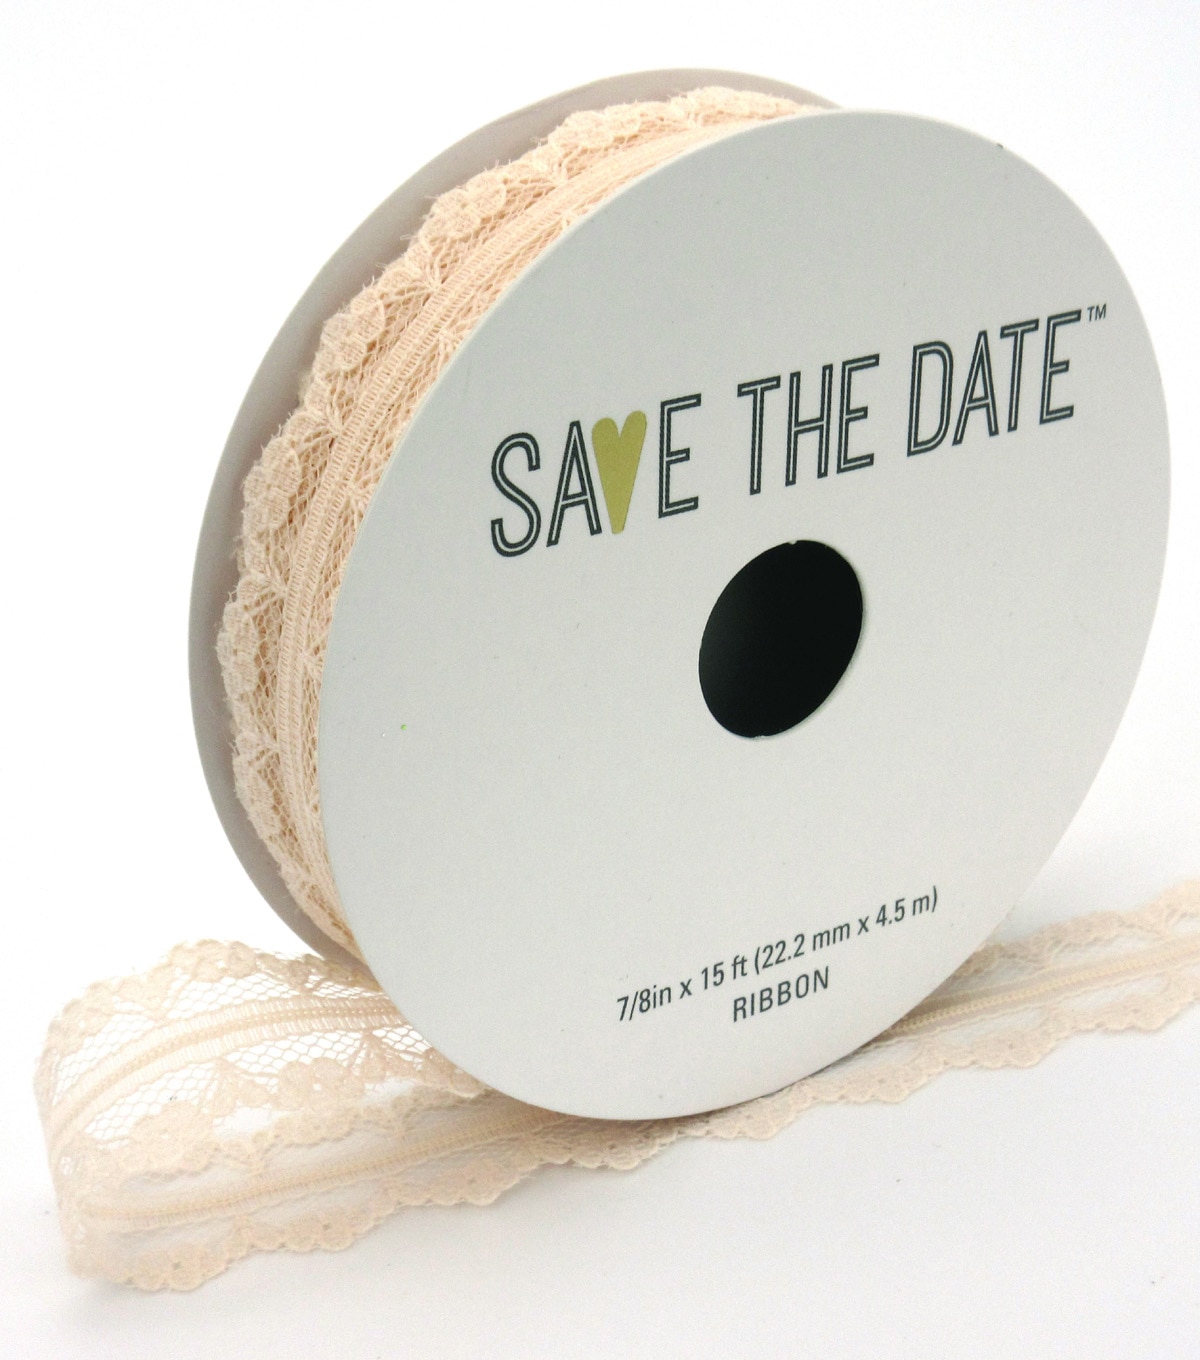 Save The Date Joann Printable Place Card Template